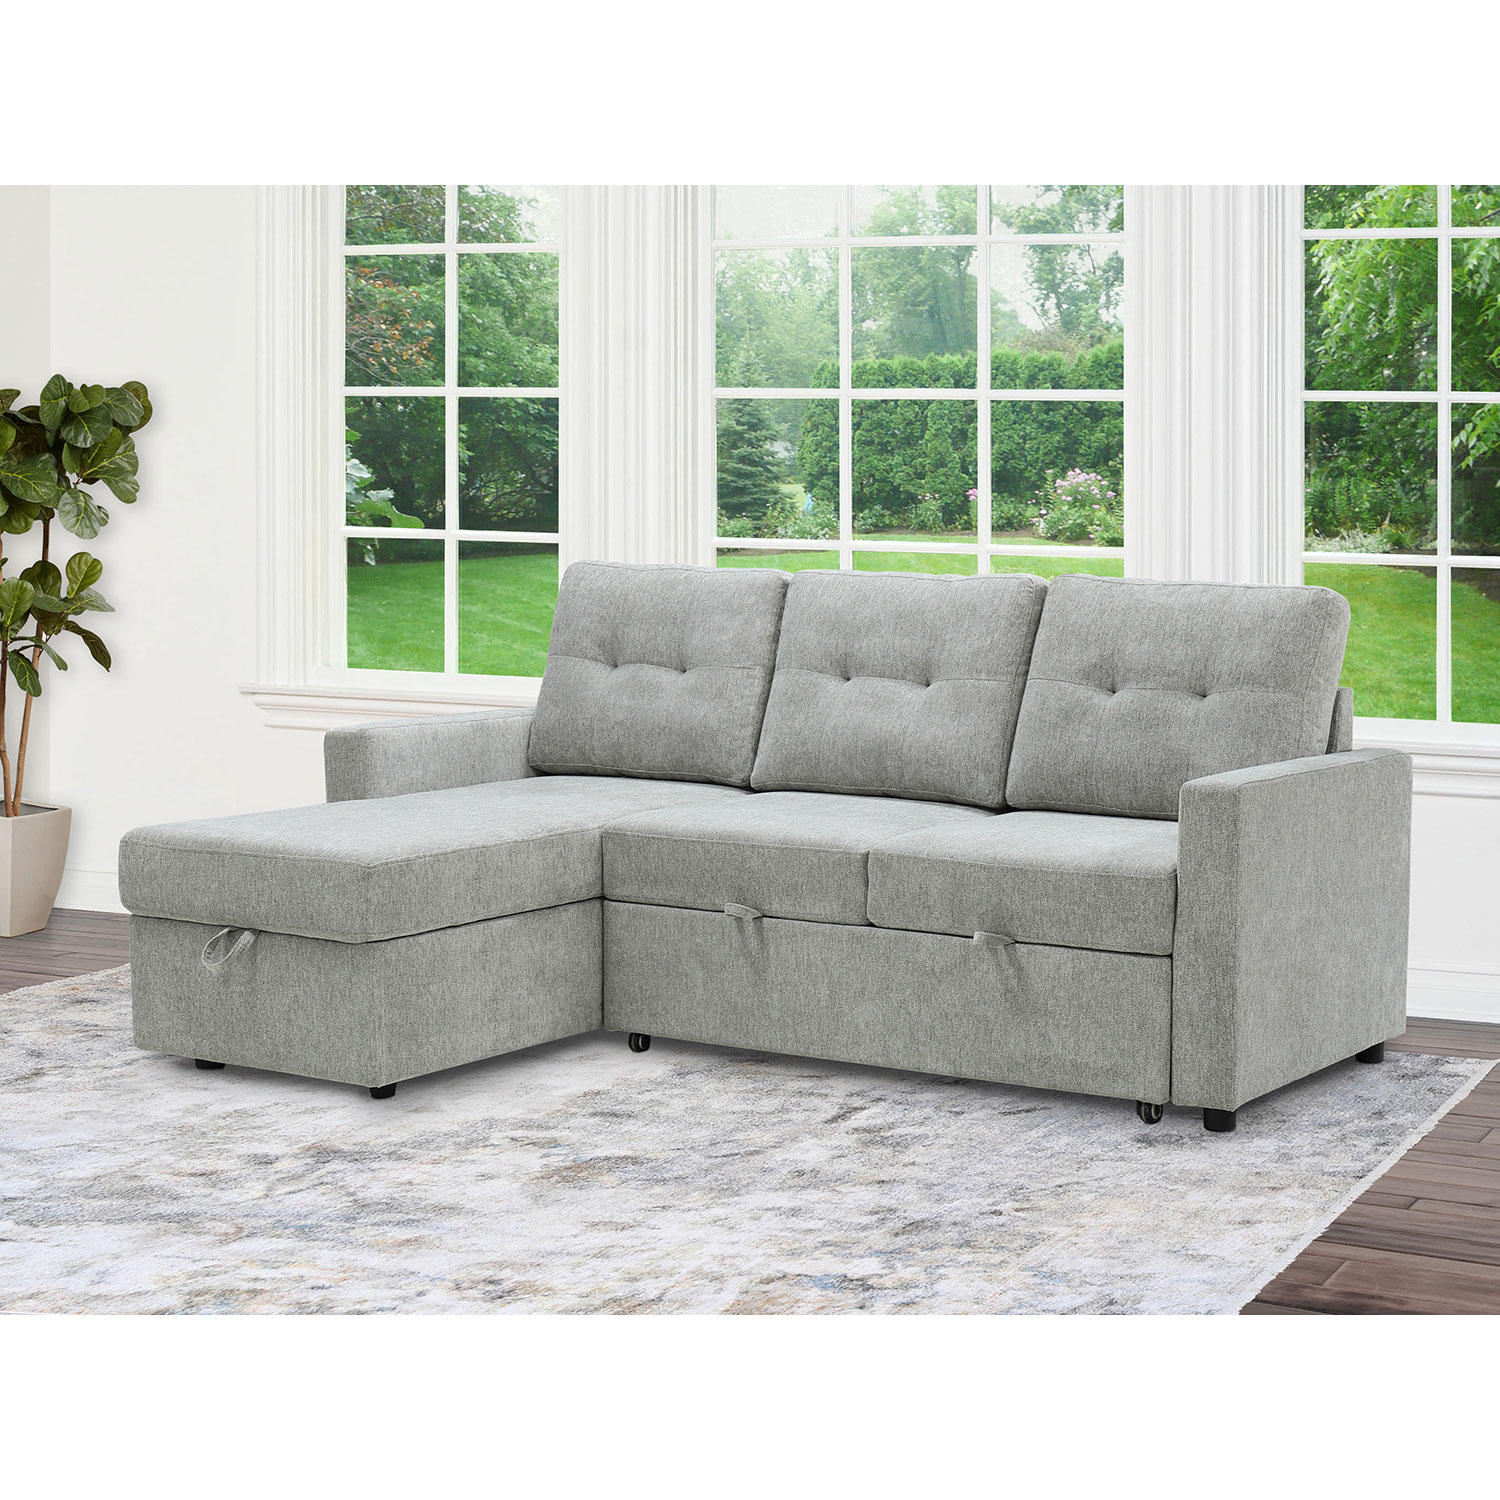 Abbyson Living Kylie Reversible Storage Sectional with Pullout Bed